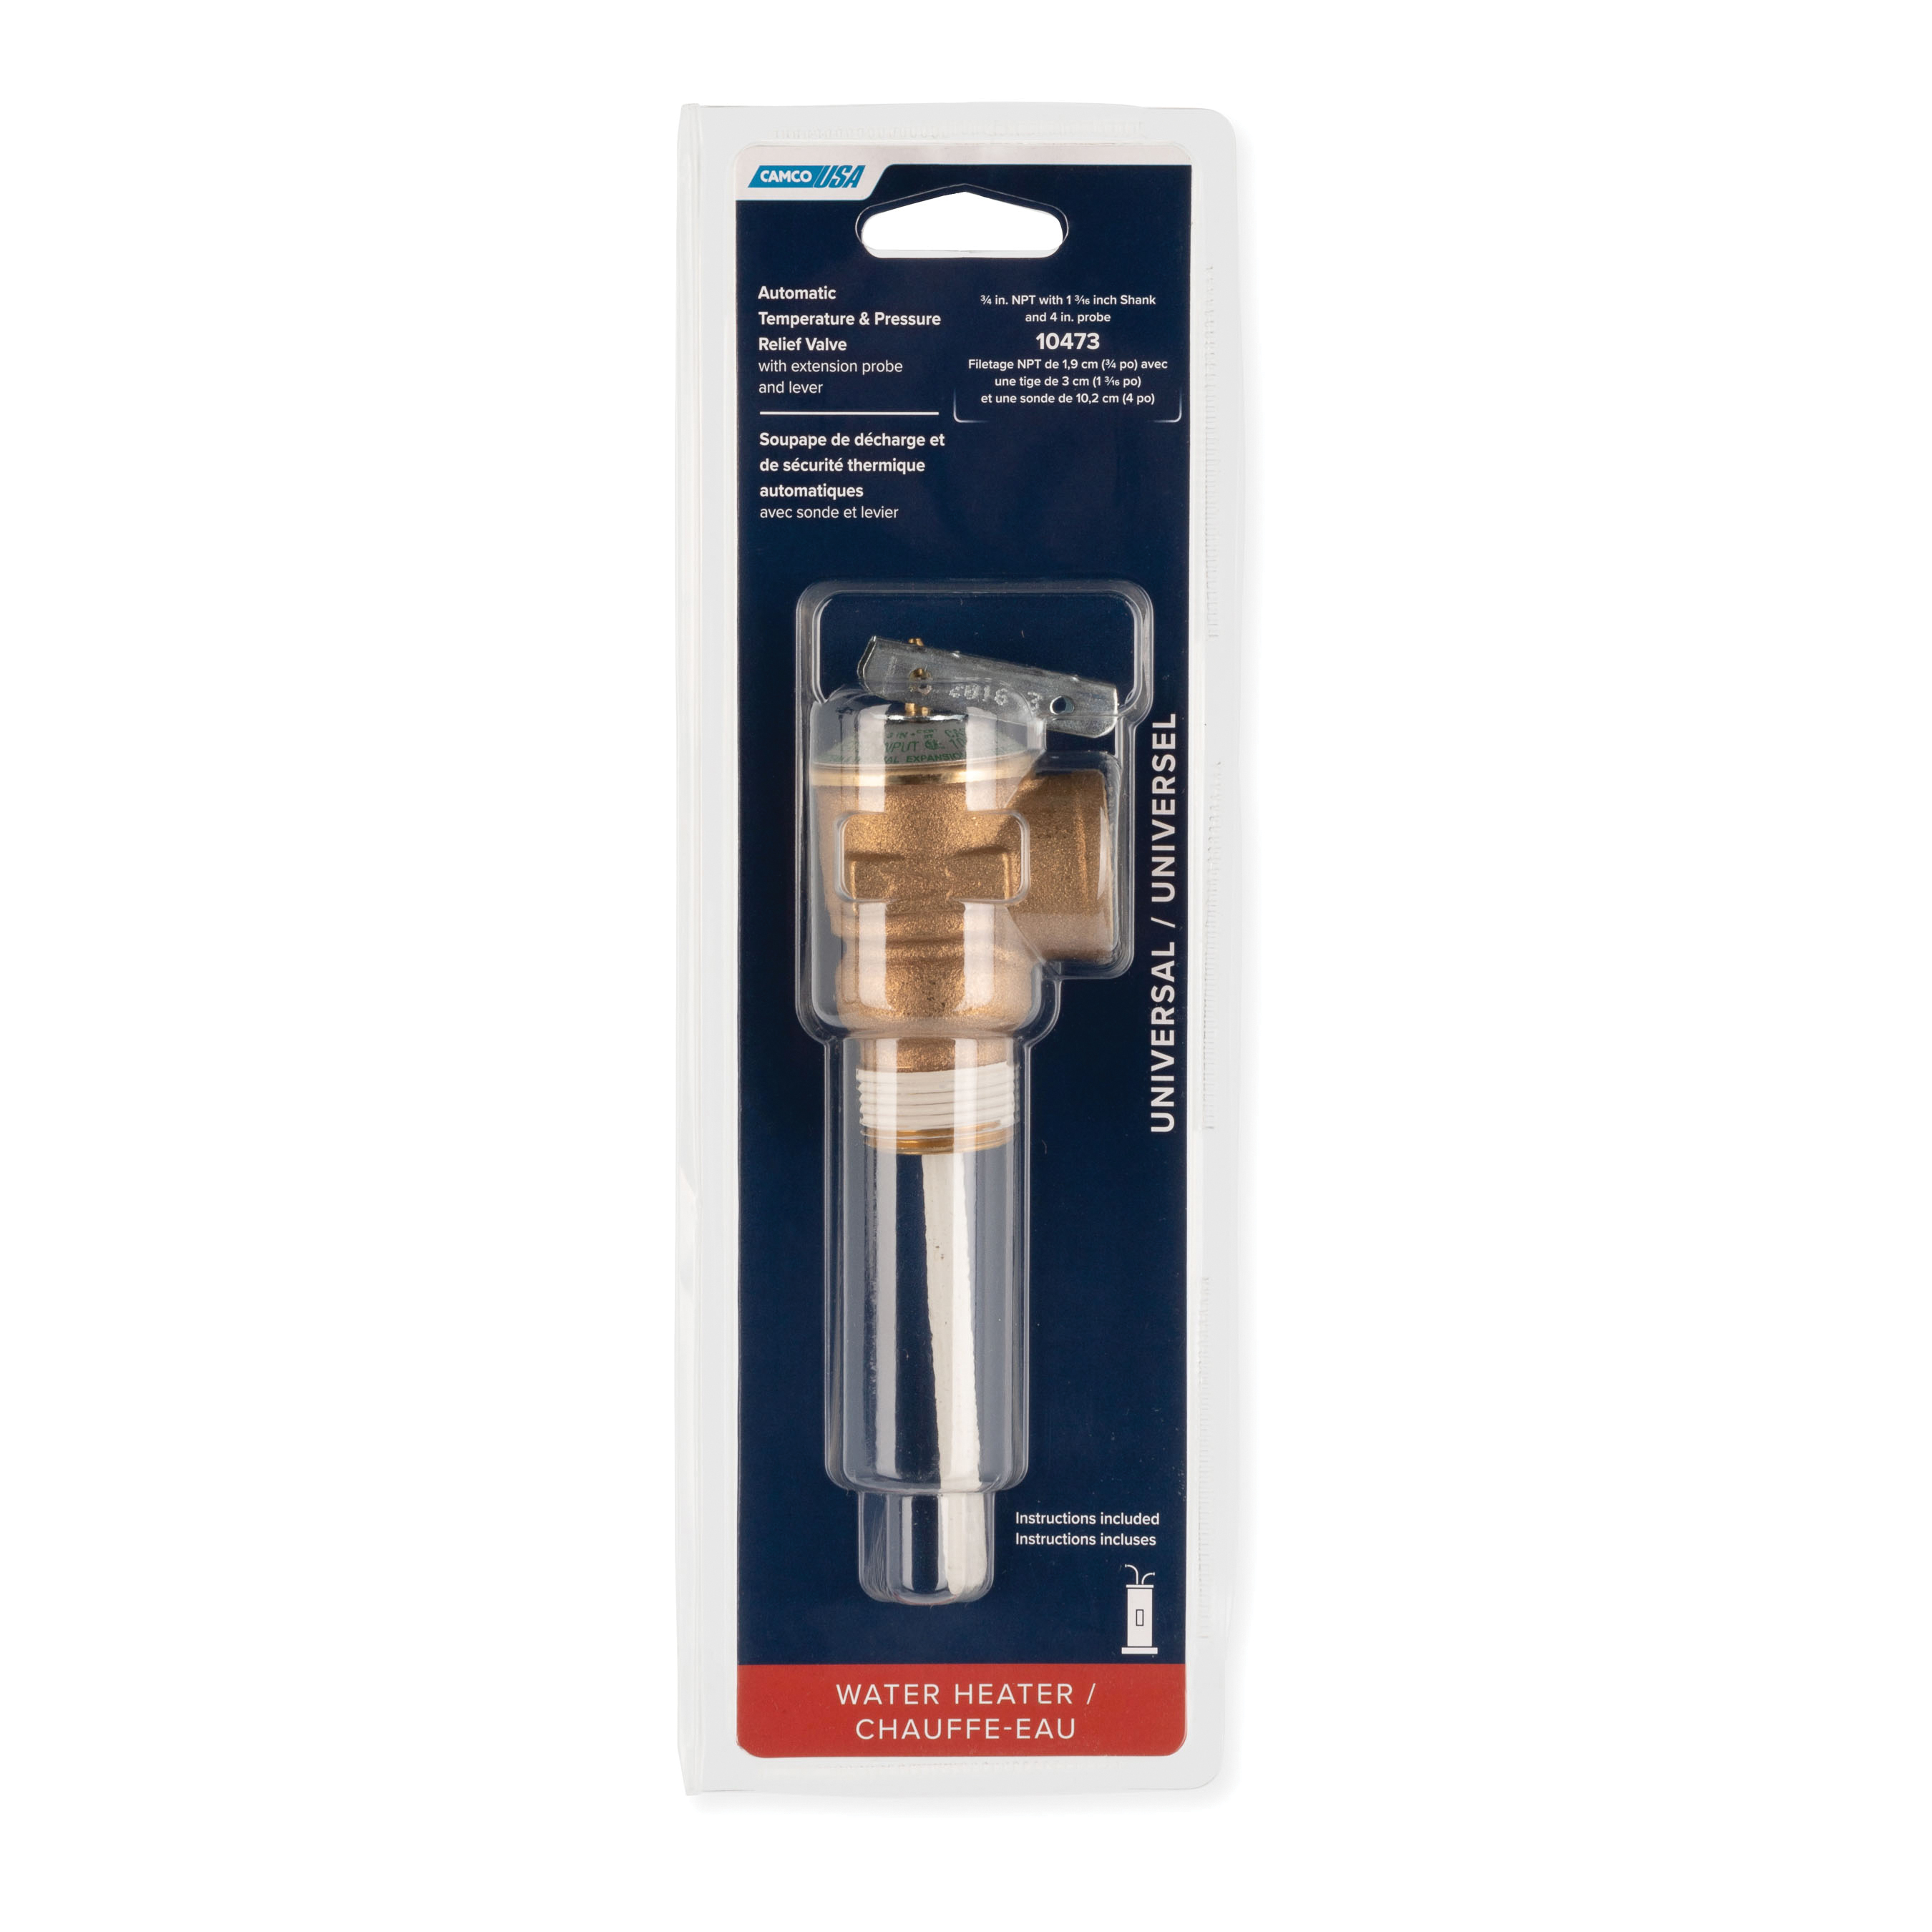 Camco 10473 Temperature and Pressure Relief Valve With 4 in Probe and Stainless Steel Spring, For Use With RV Water Heater, 3/4 in NPT, 150 psi and 210 deg, Brass, Domestic